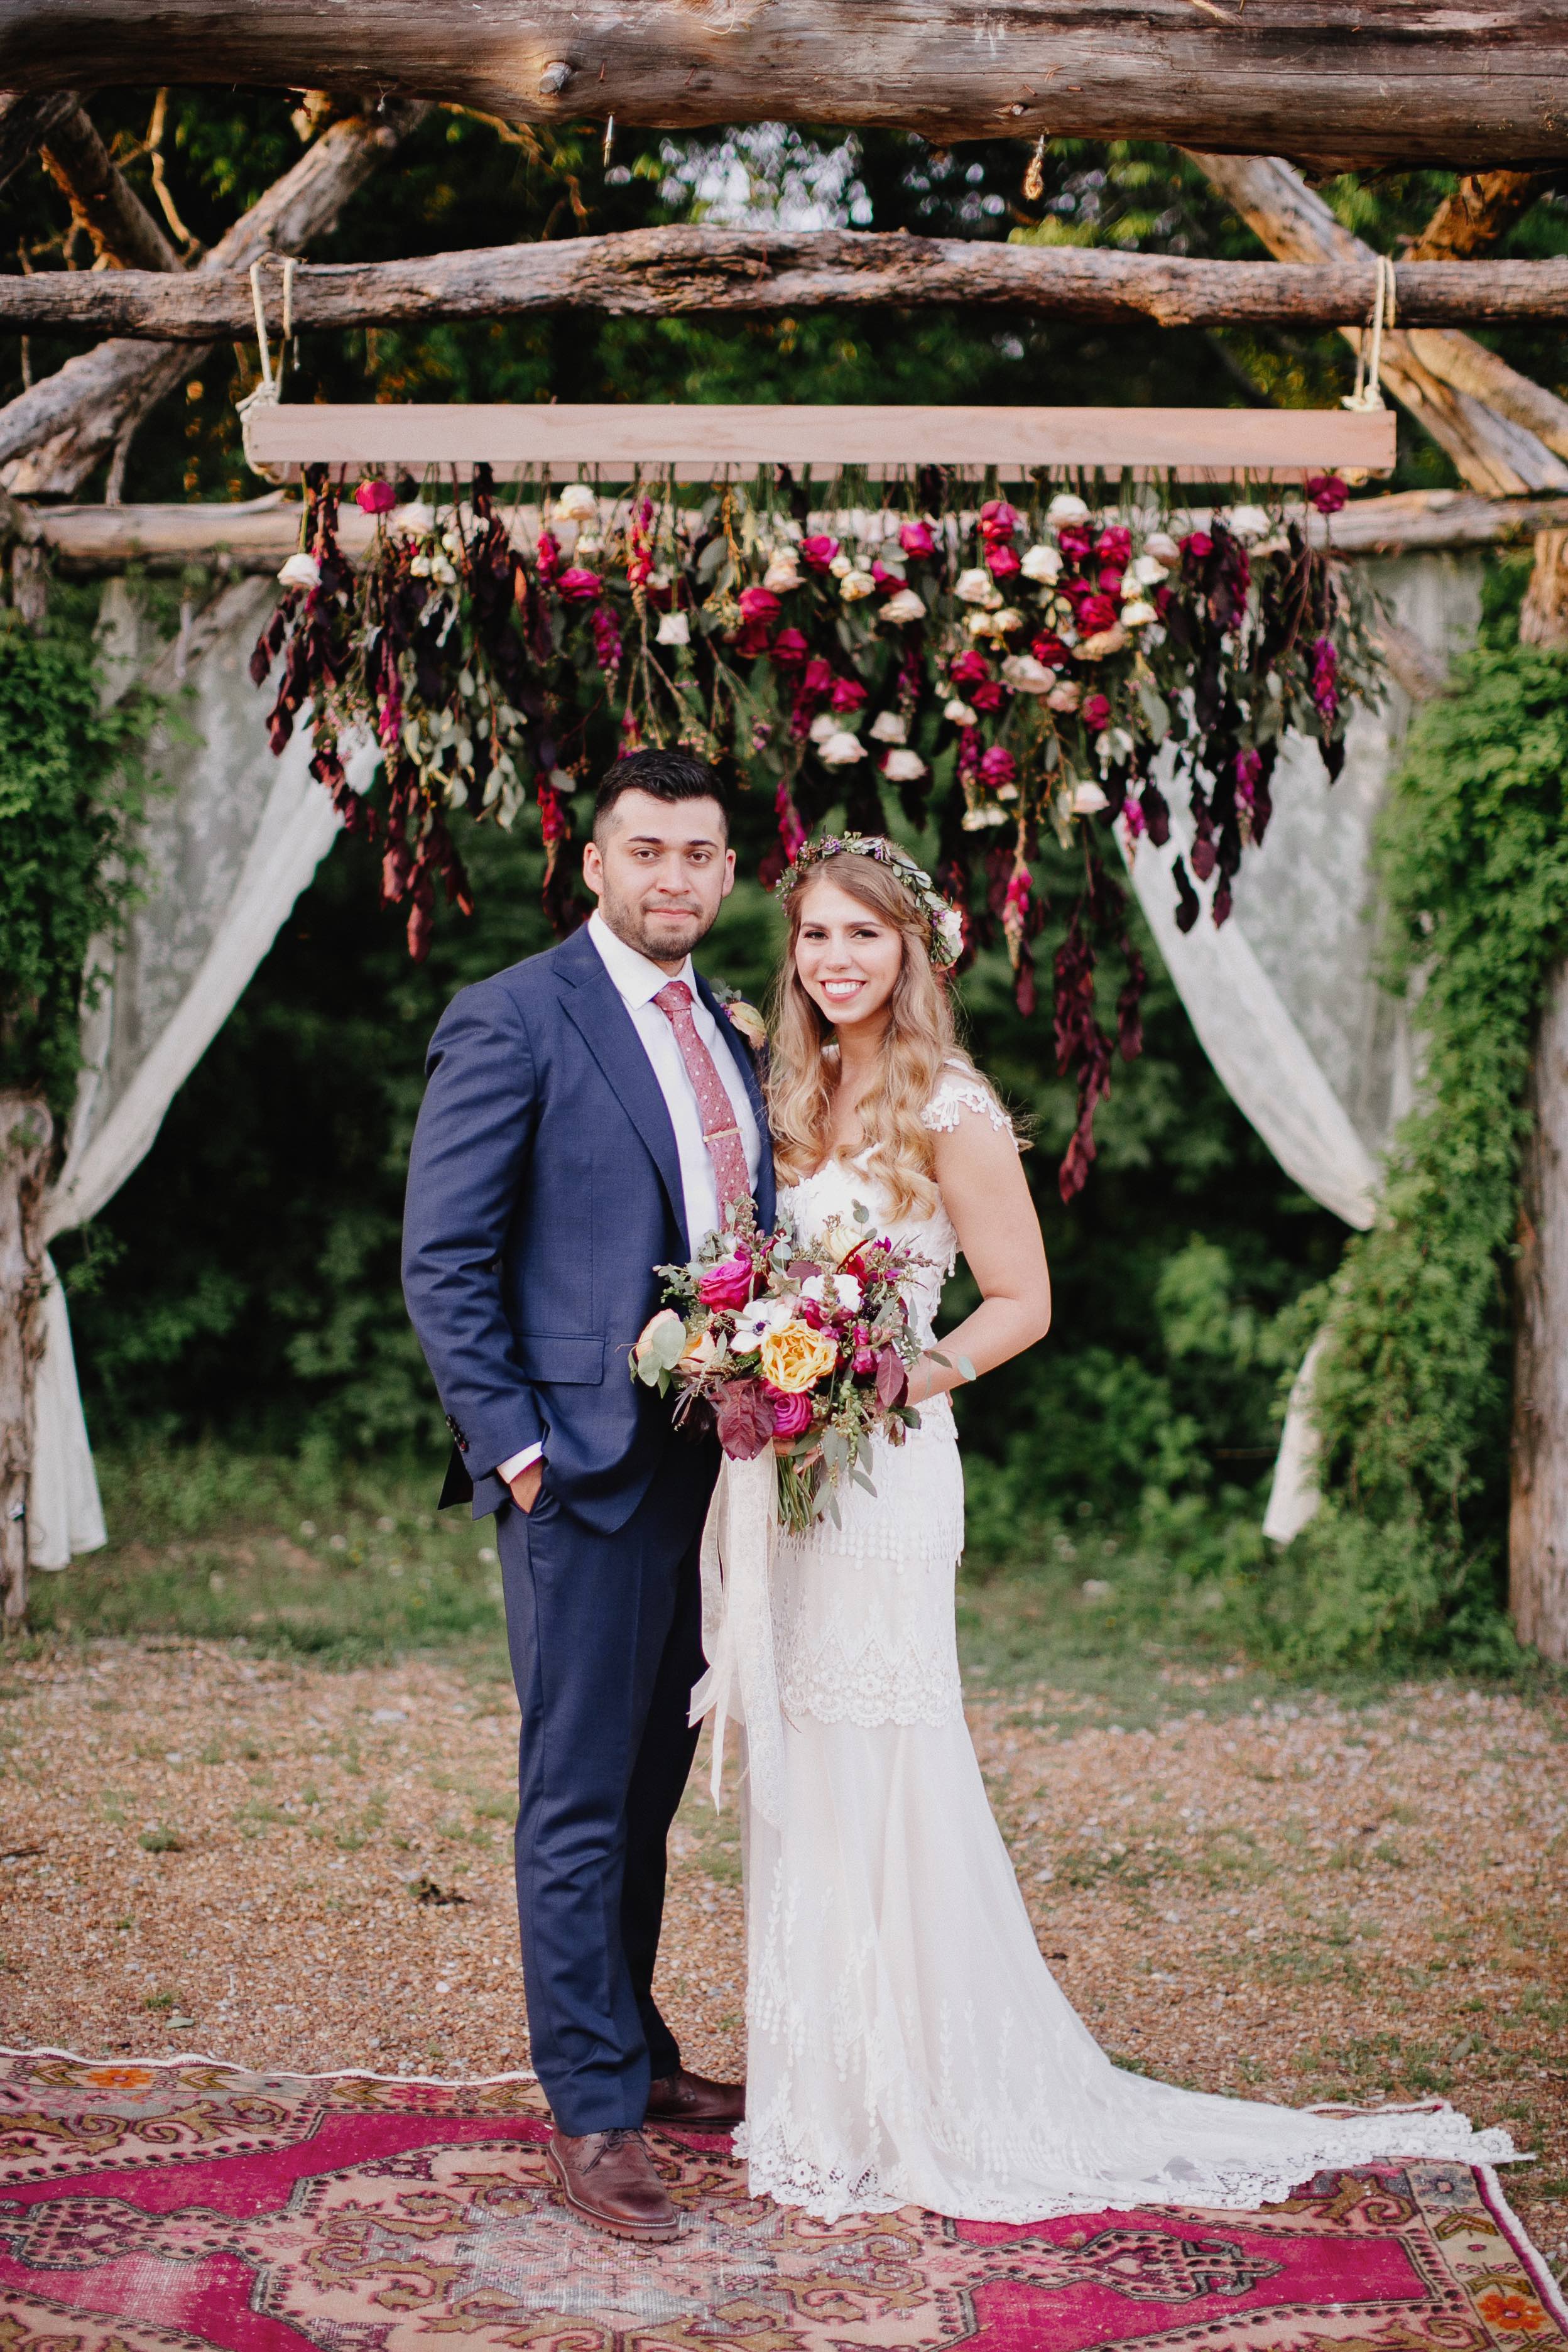 Rustic, bohemian wedding in the Tennessee countryside // Nashville Floral Design